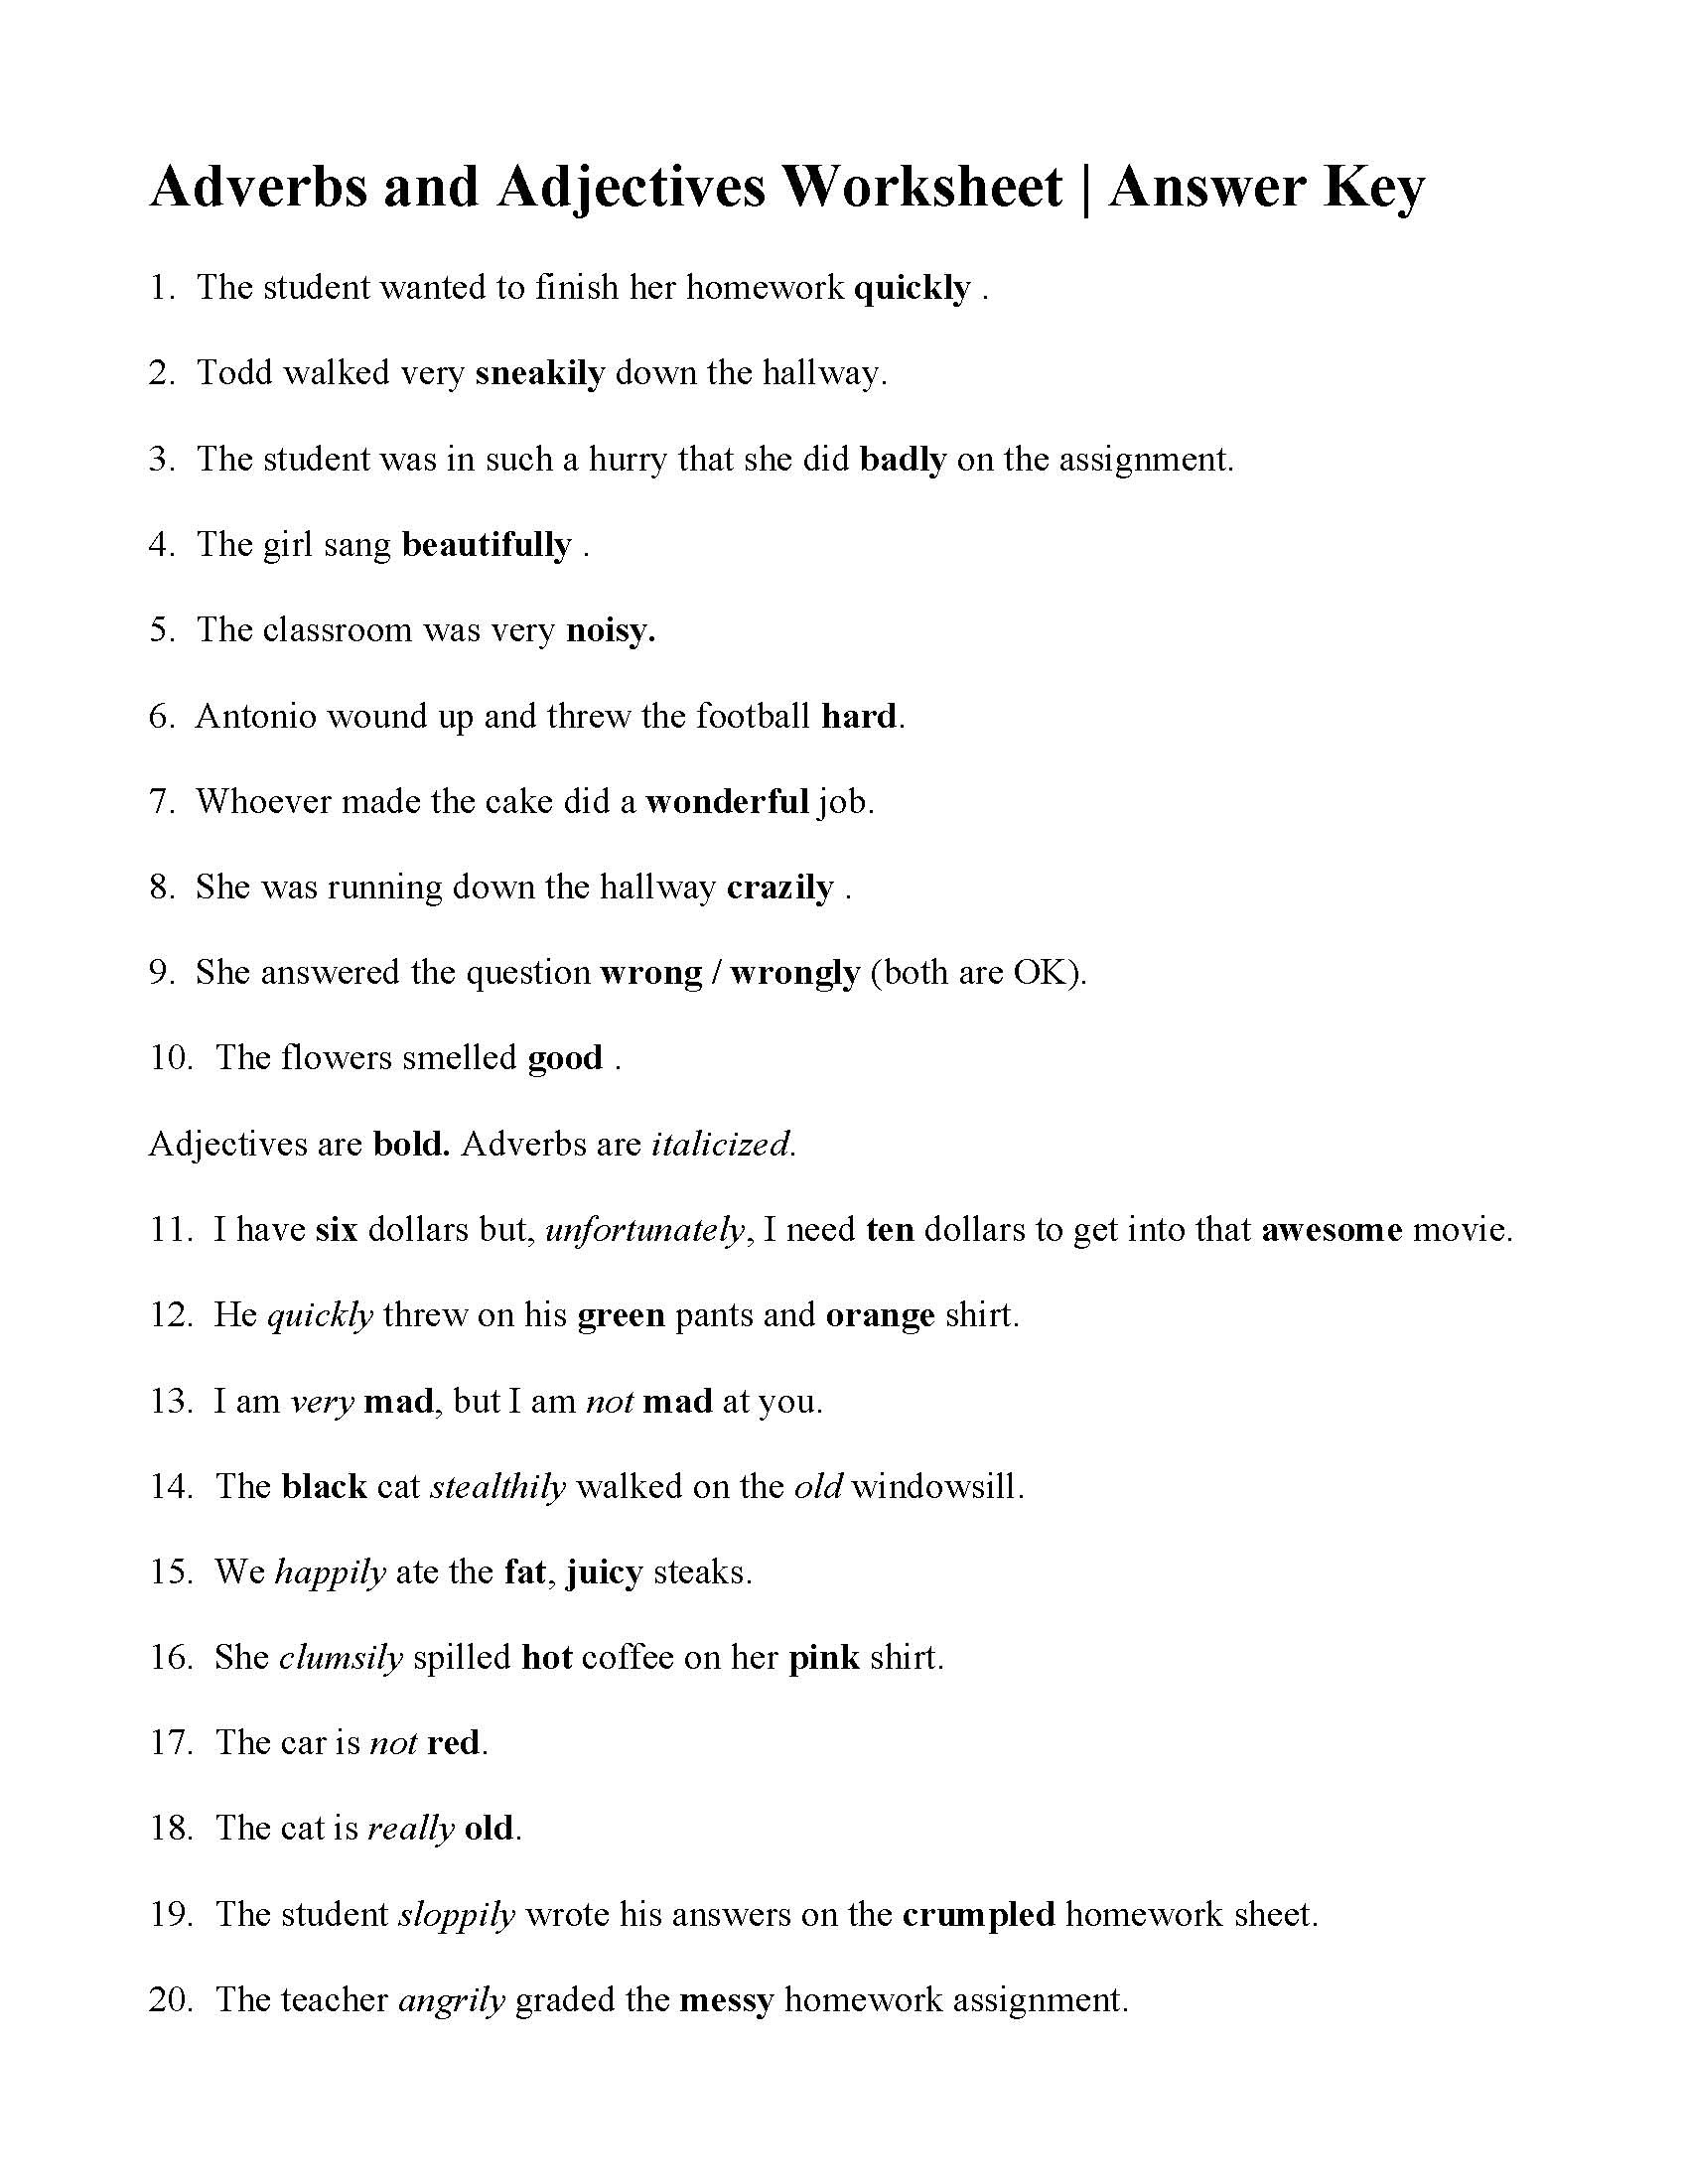 adverb-or-adjective-worksheet-with-answers